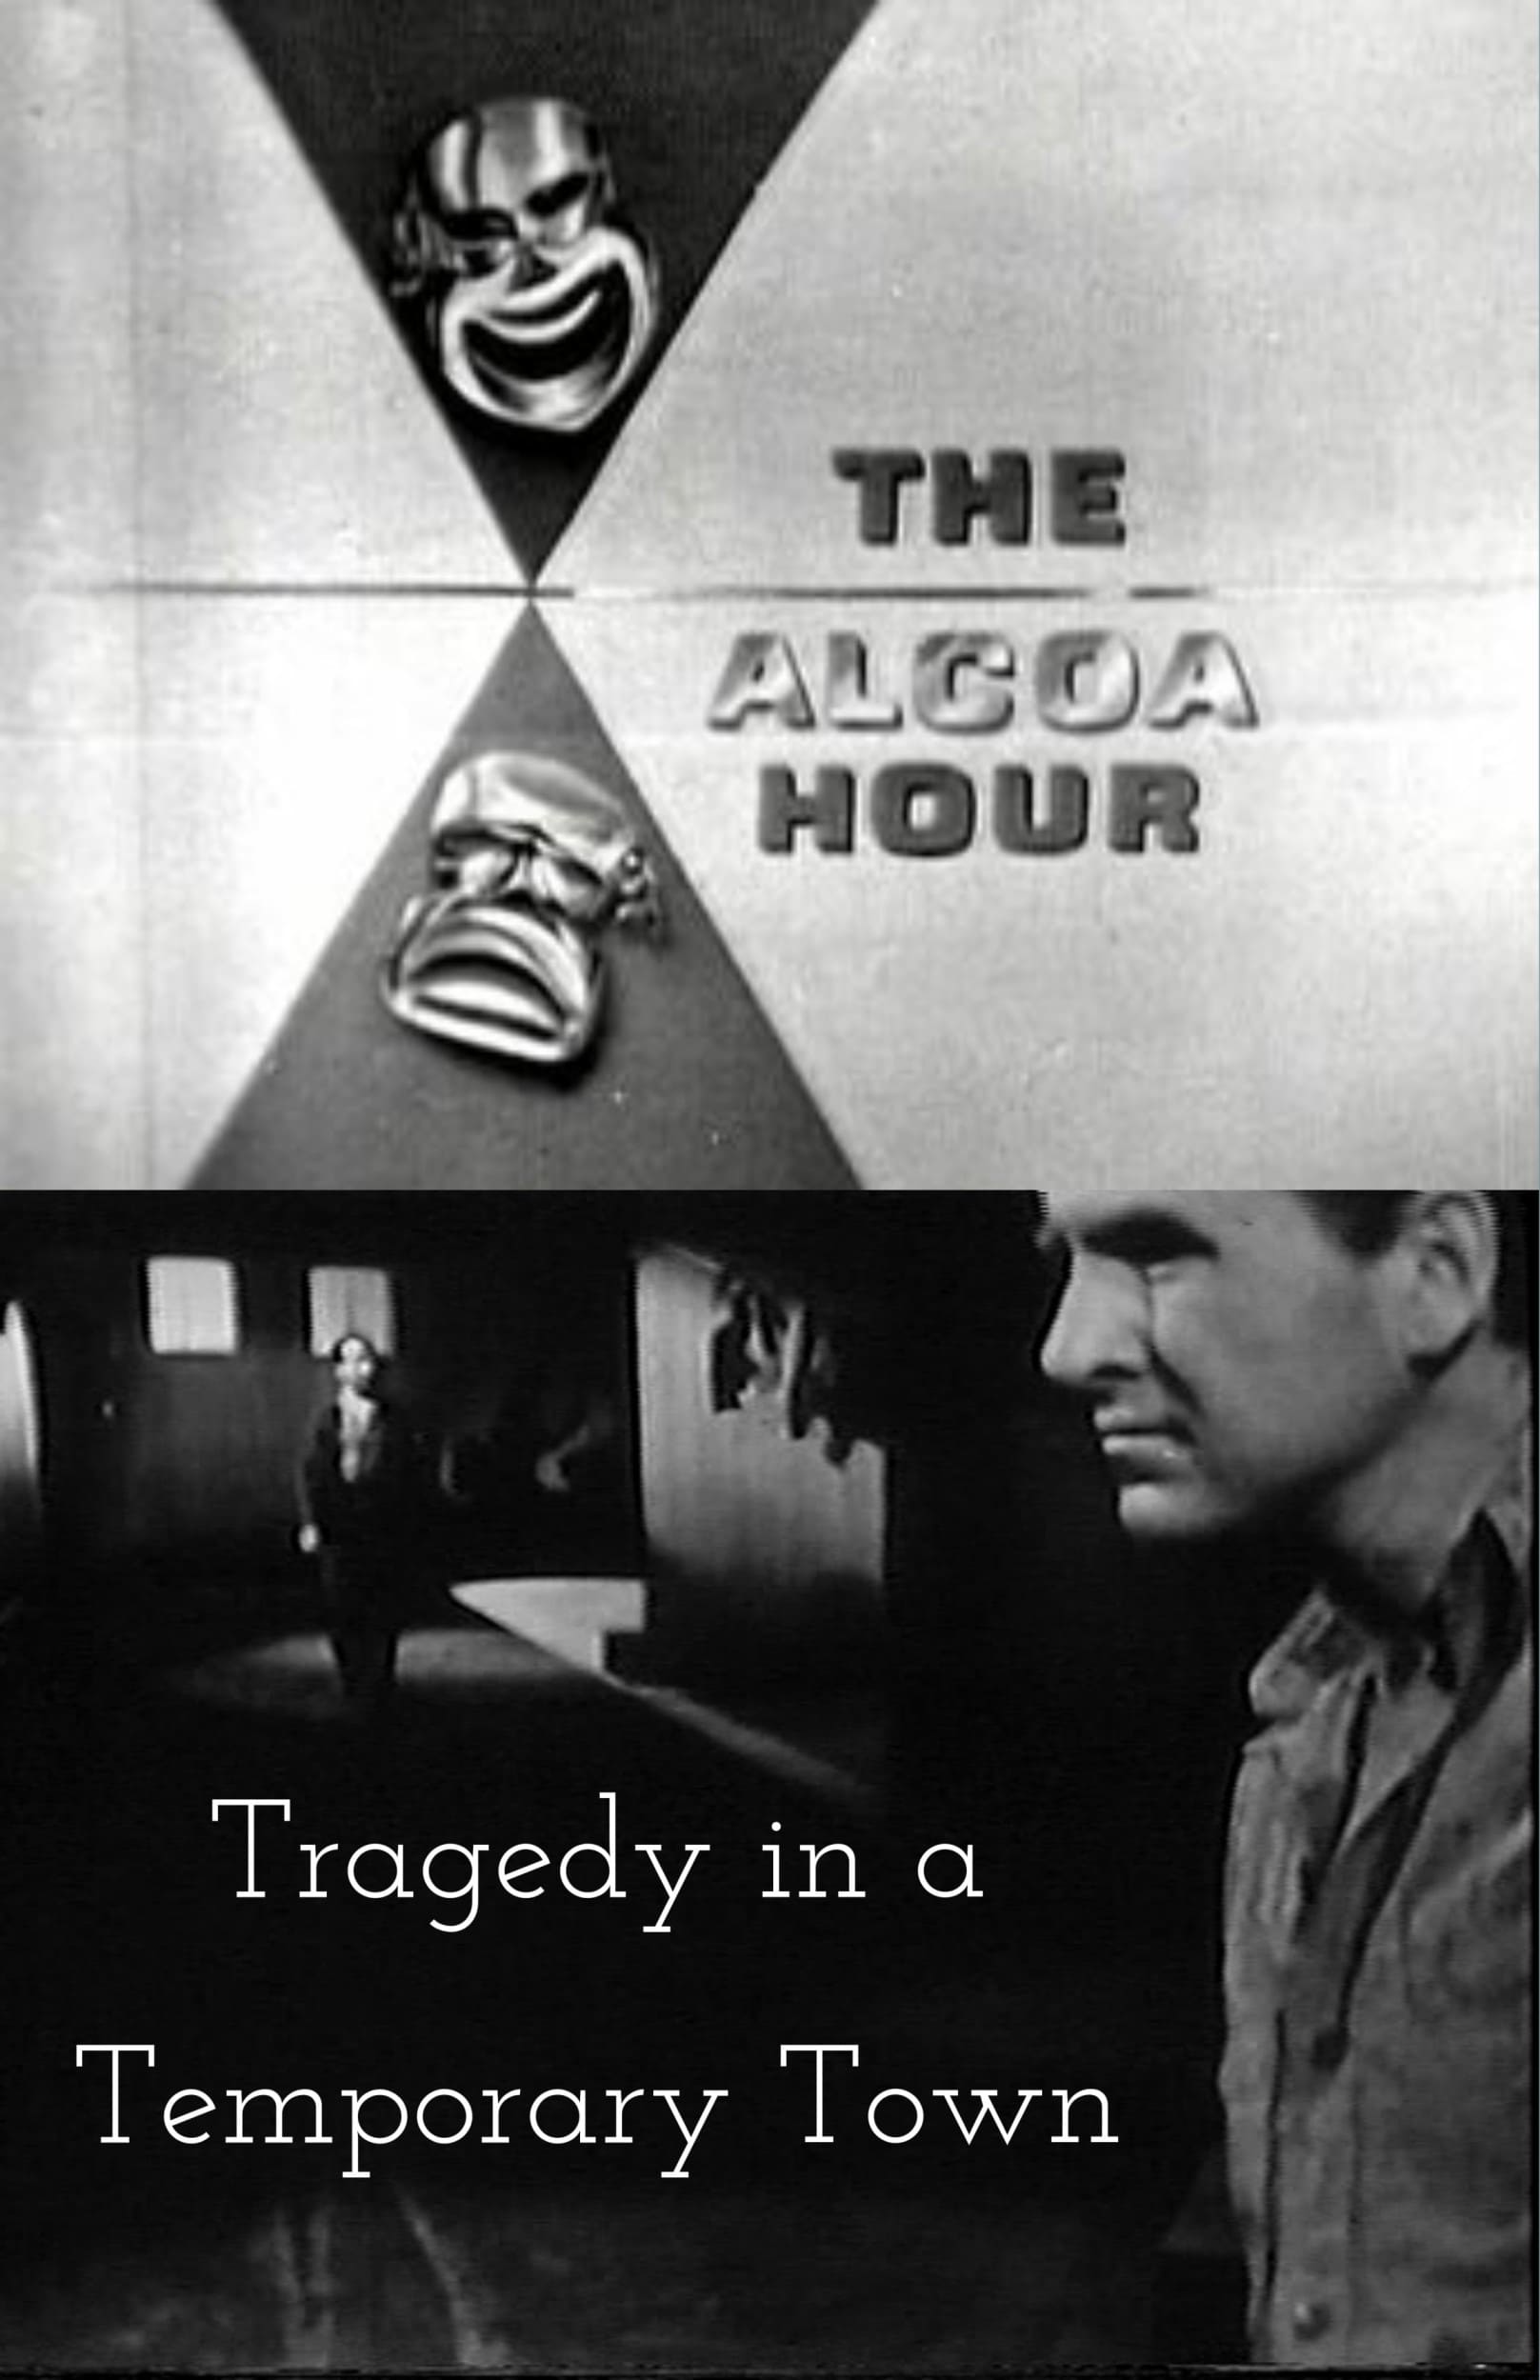 Tragedy in a Temporary Town film